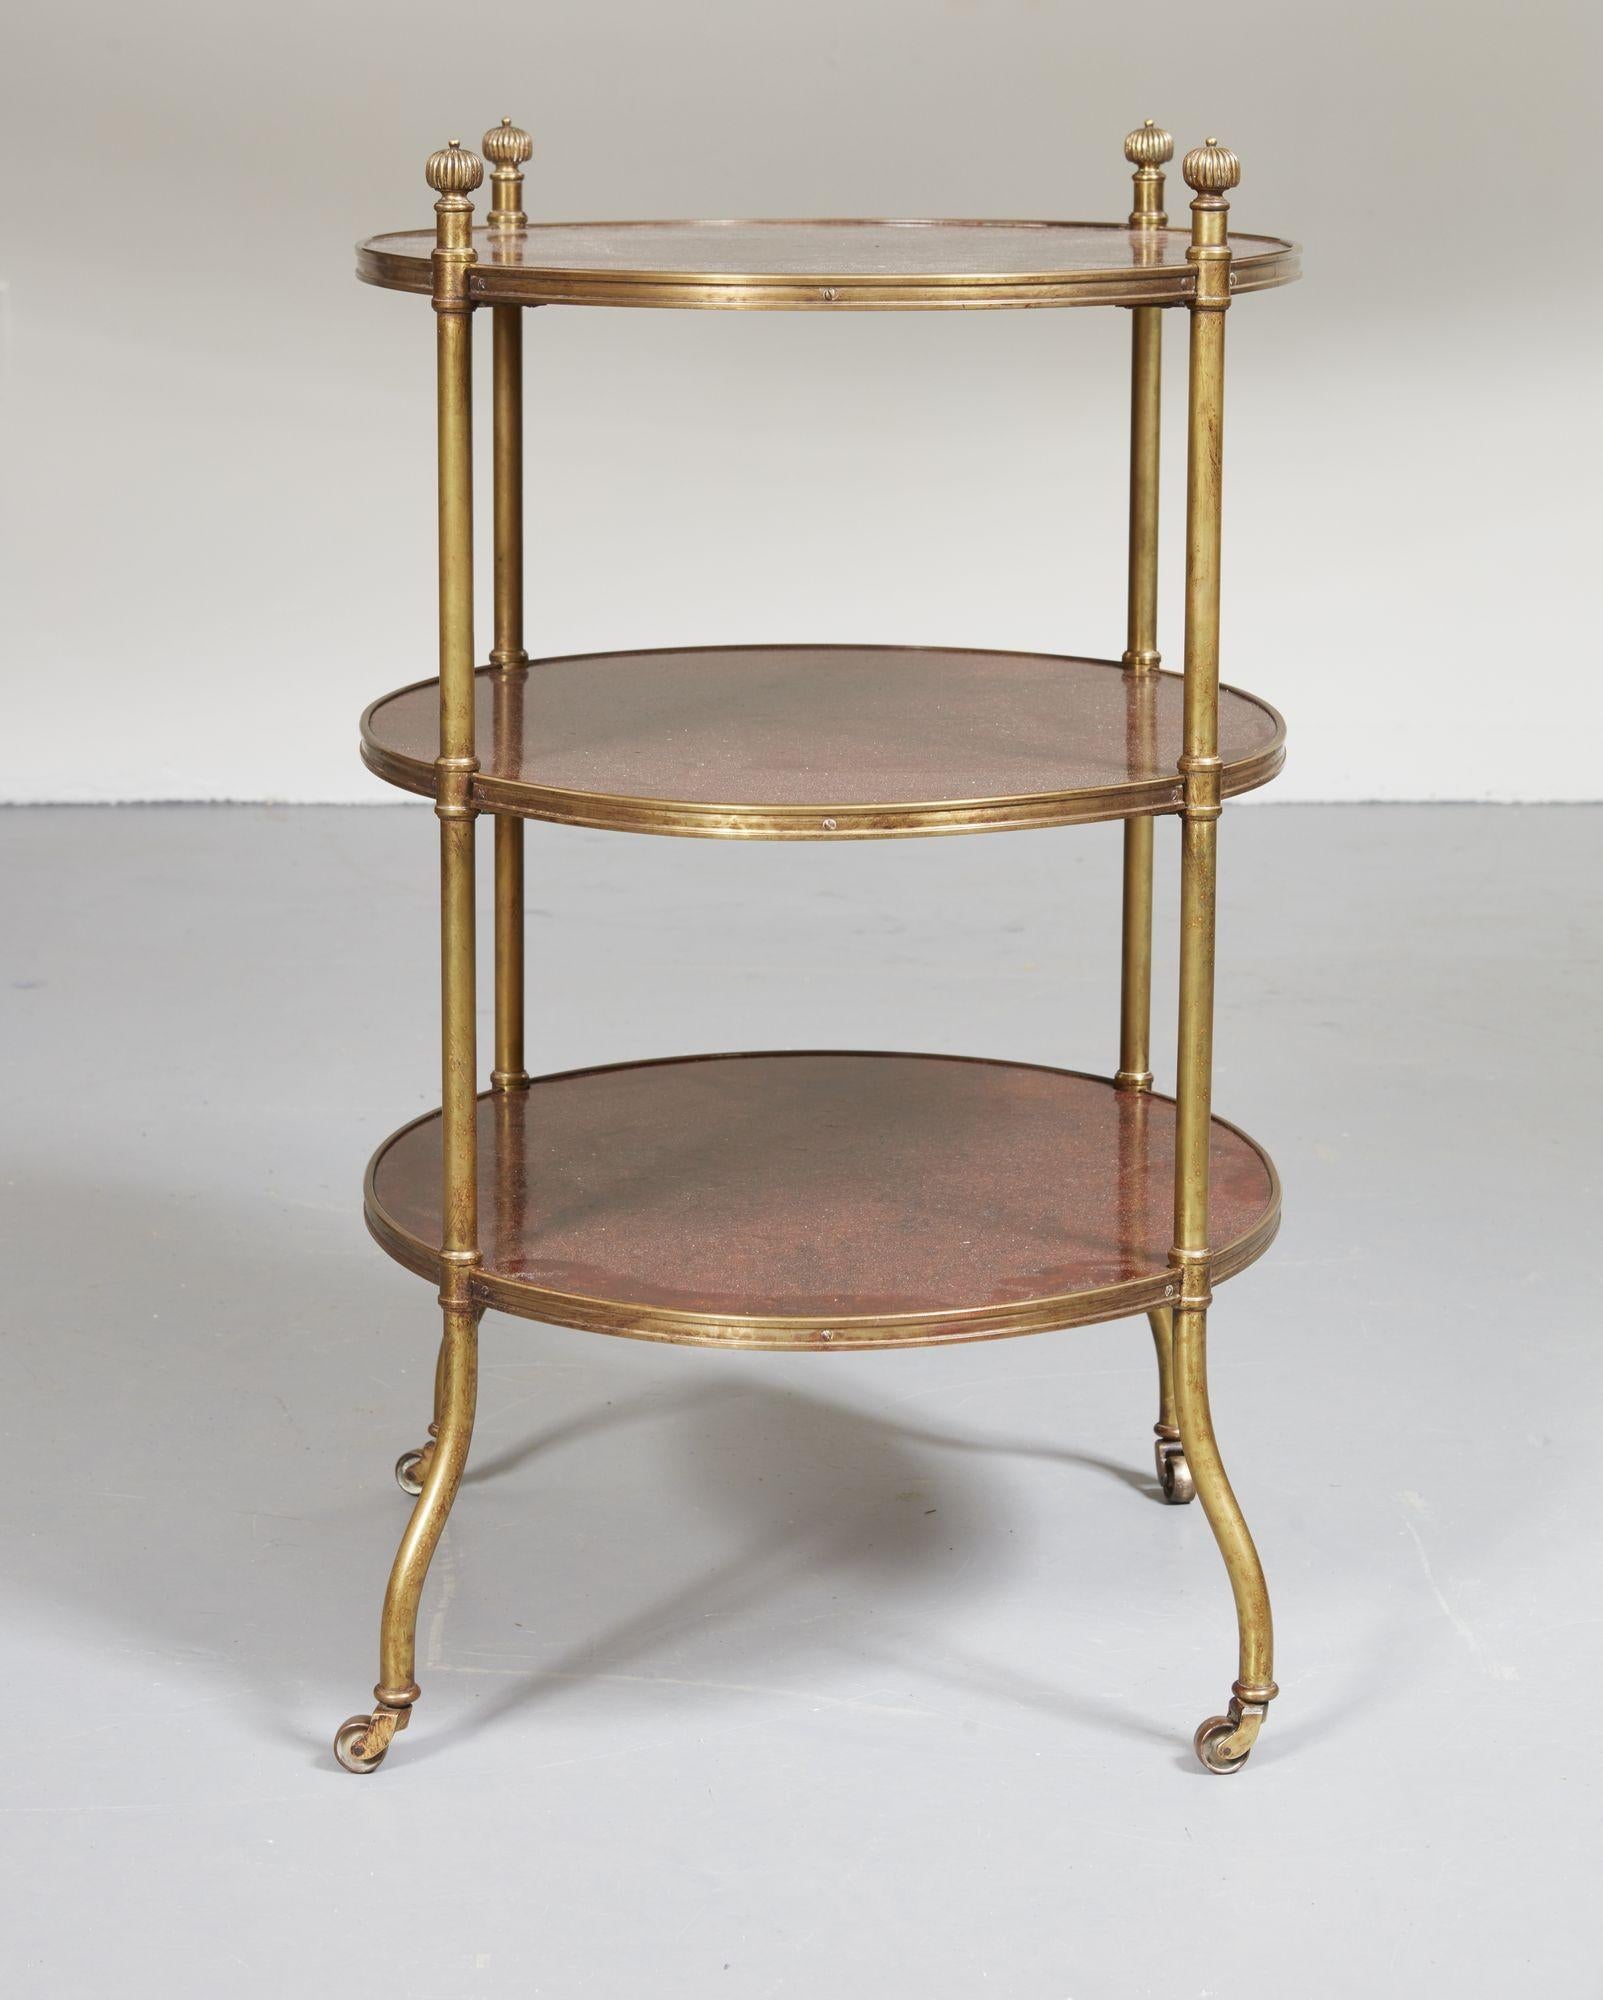 Early 19th Century Early 19th C. English Campaign Plum Pudding Tiered Table